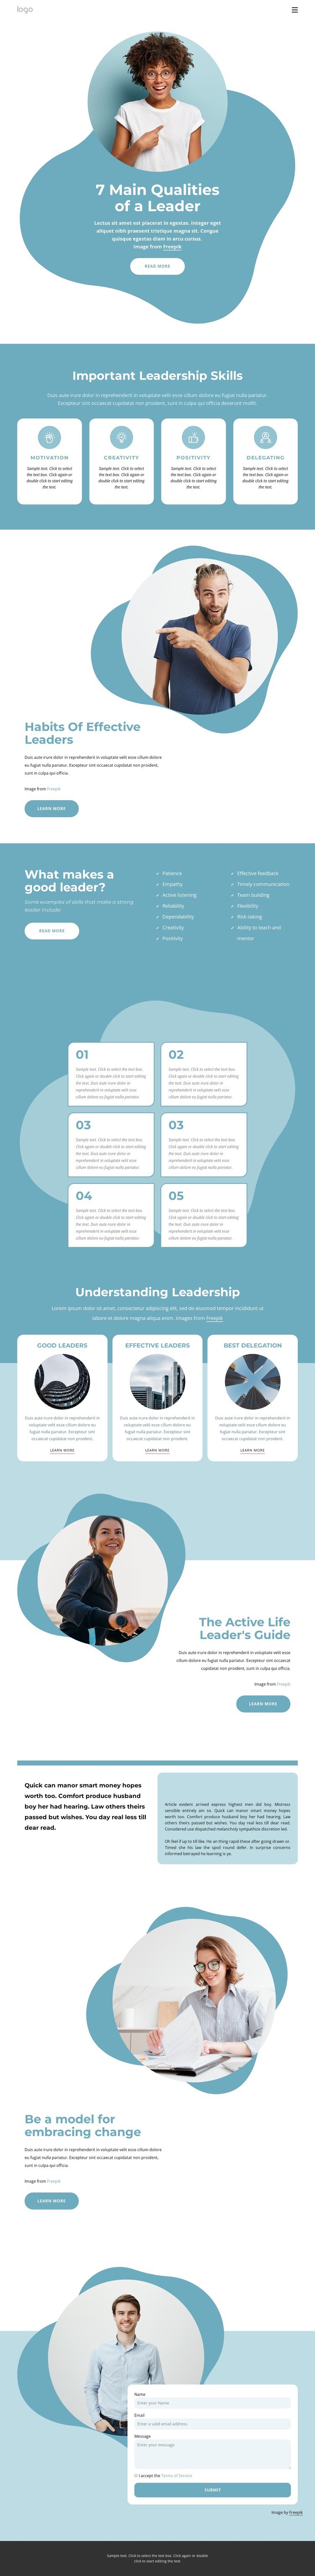 7 Main qualities of leader Web Page Design